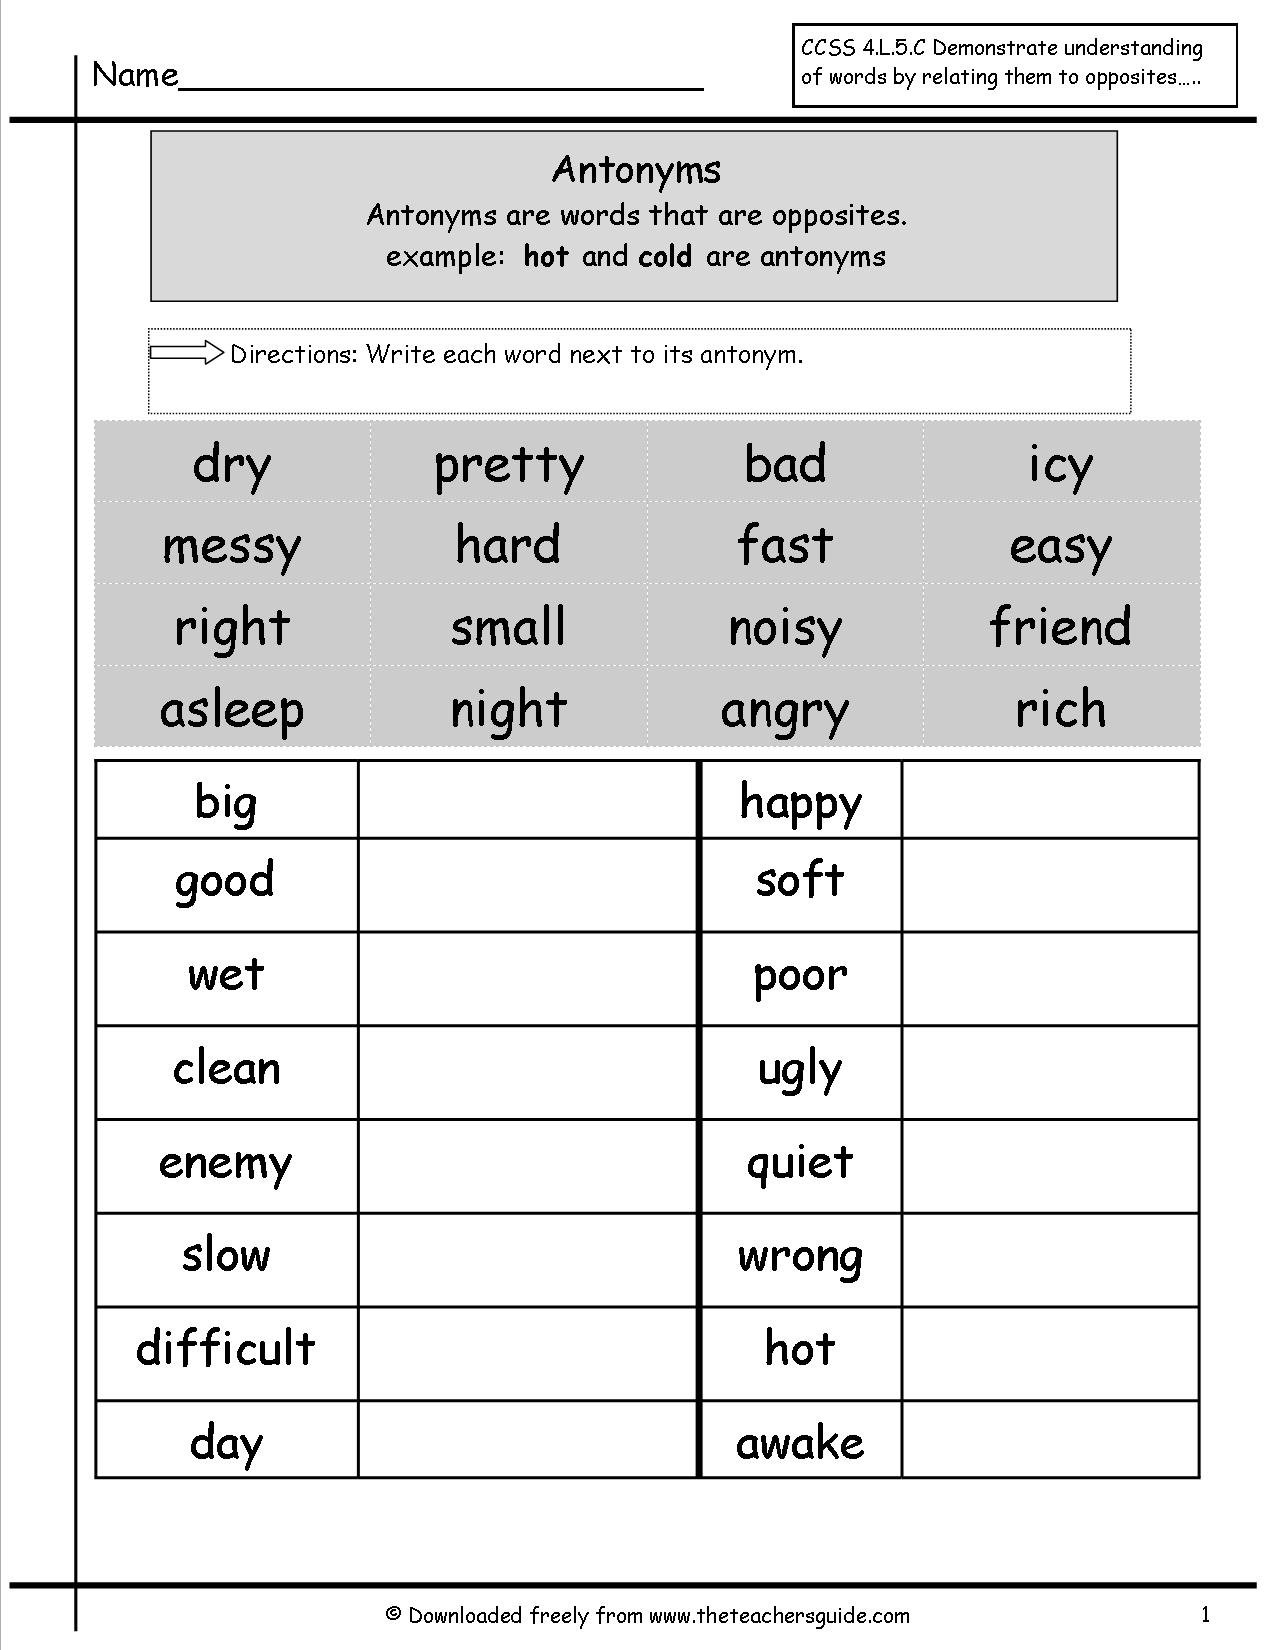 Free Grammar And Language Arts From The Teacher's Guide Pertaining To Grammar Suffixes Worksheets